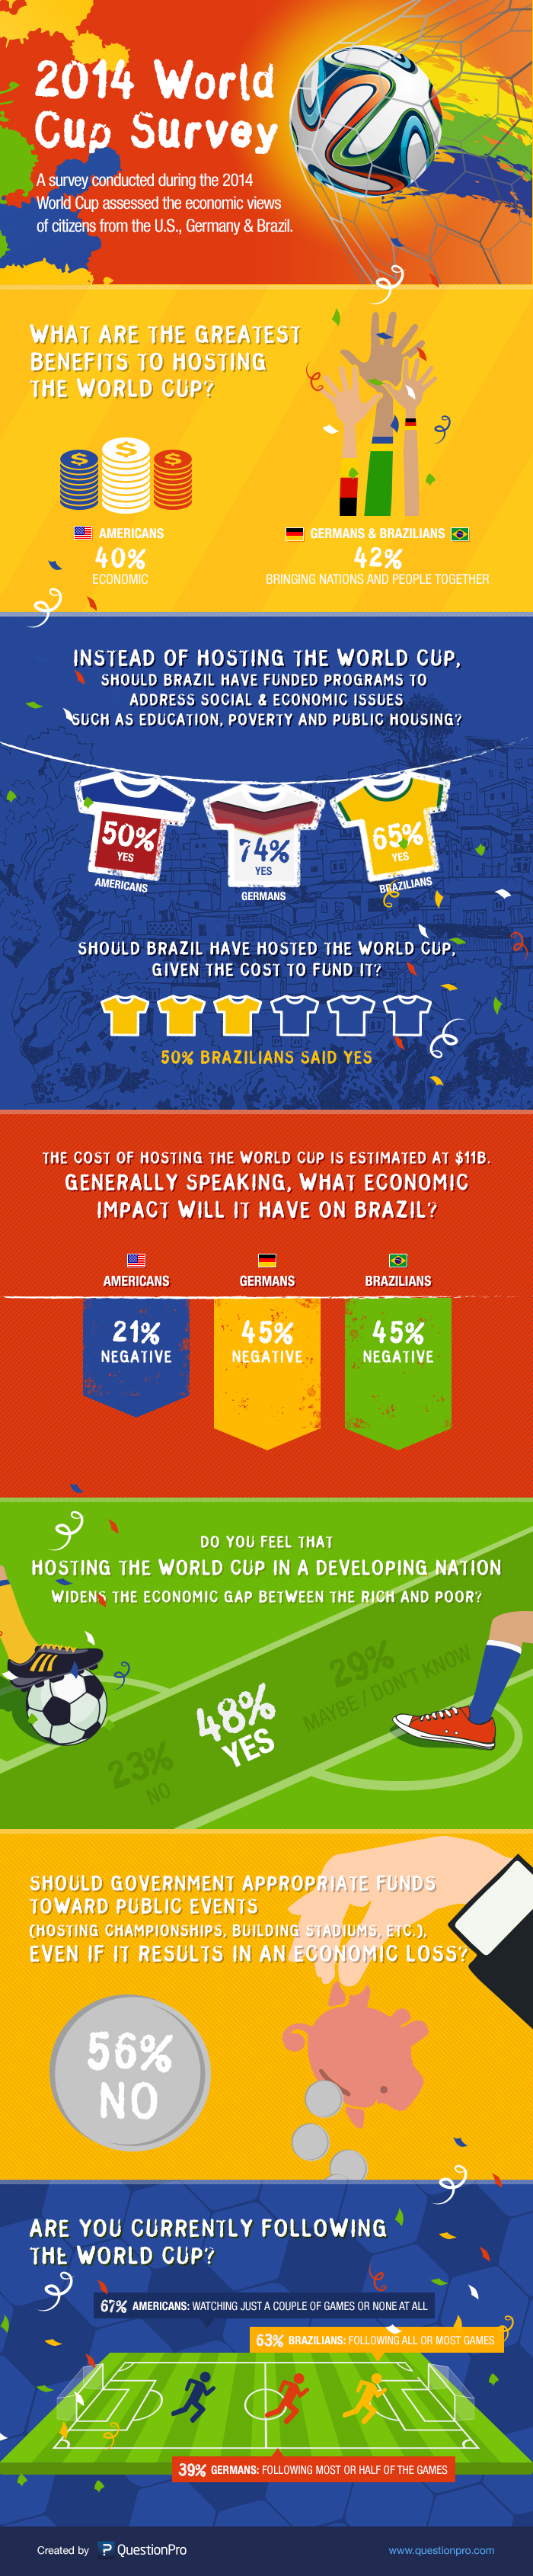 INFOGRAPHIC: Greatest Benefit of World Cup - Americans: Economic Gains; Germans and Brazilians: Uniting Nations